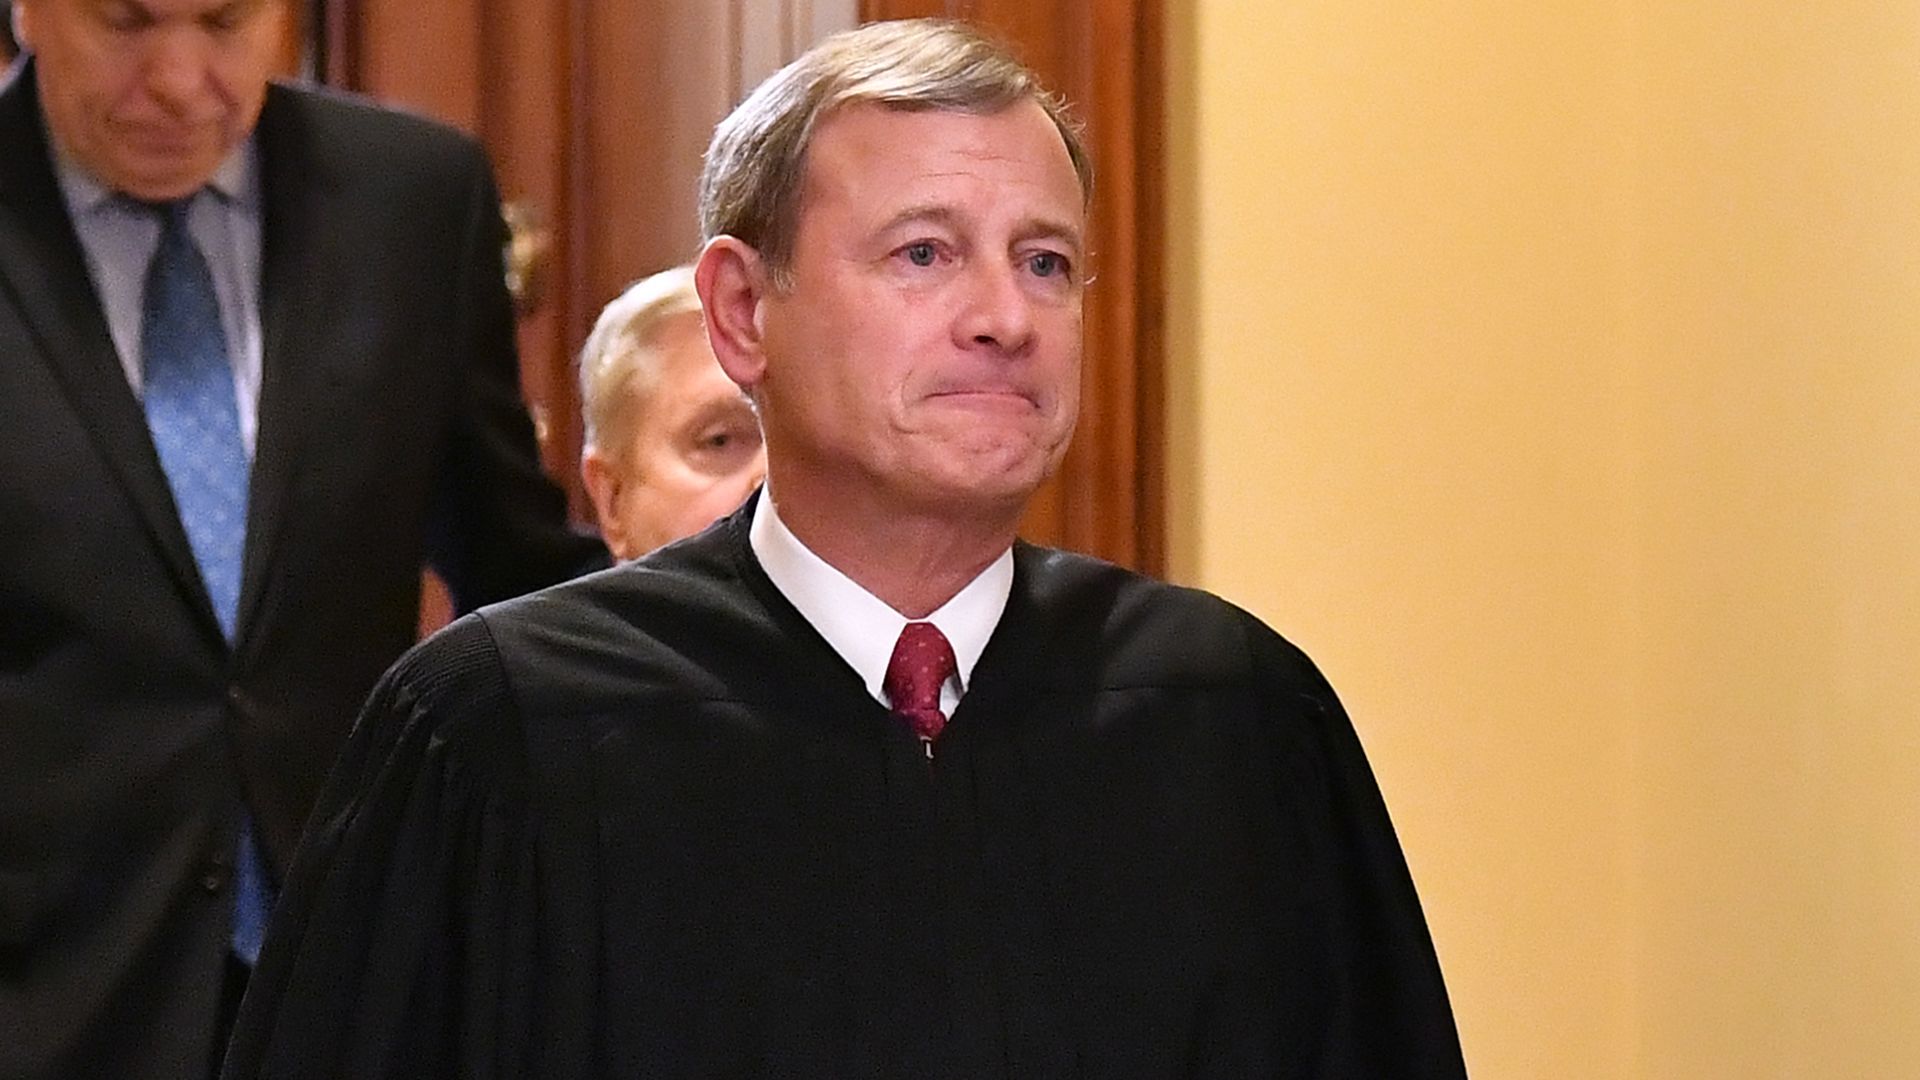 In this image, Justice Roberts stands 